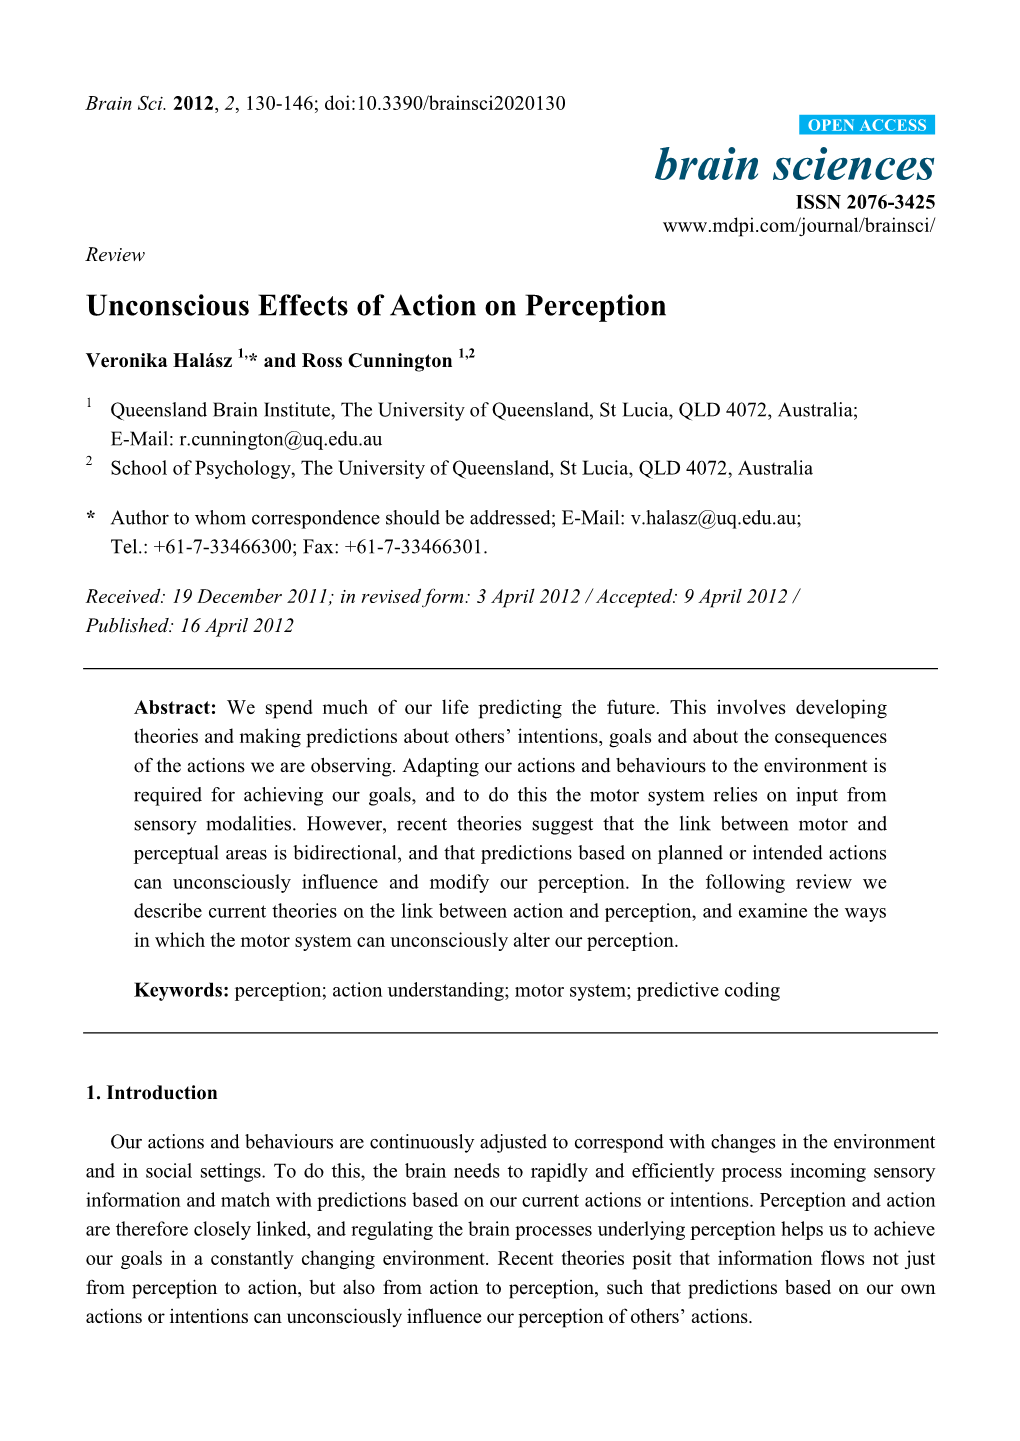 Unconscious Effects of Action on Perception